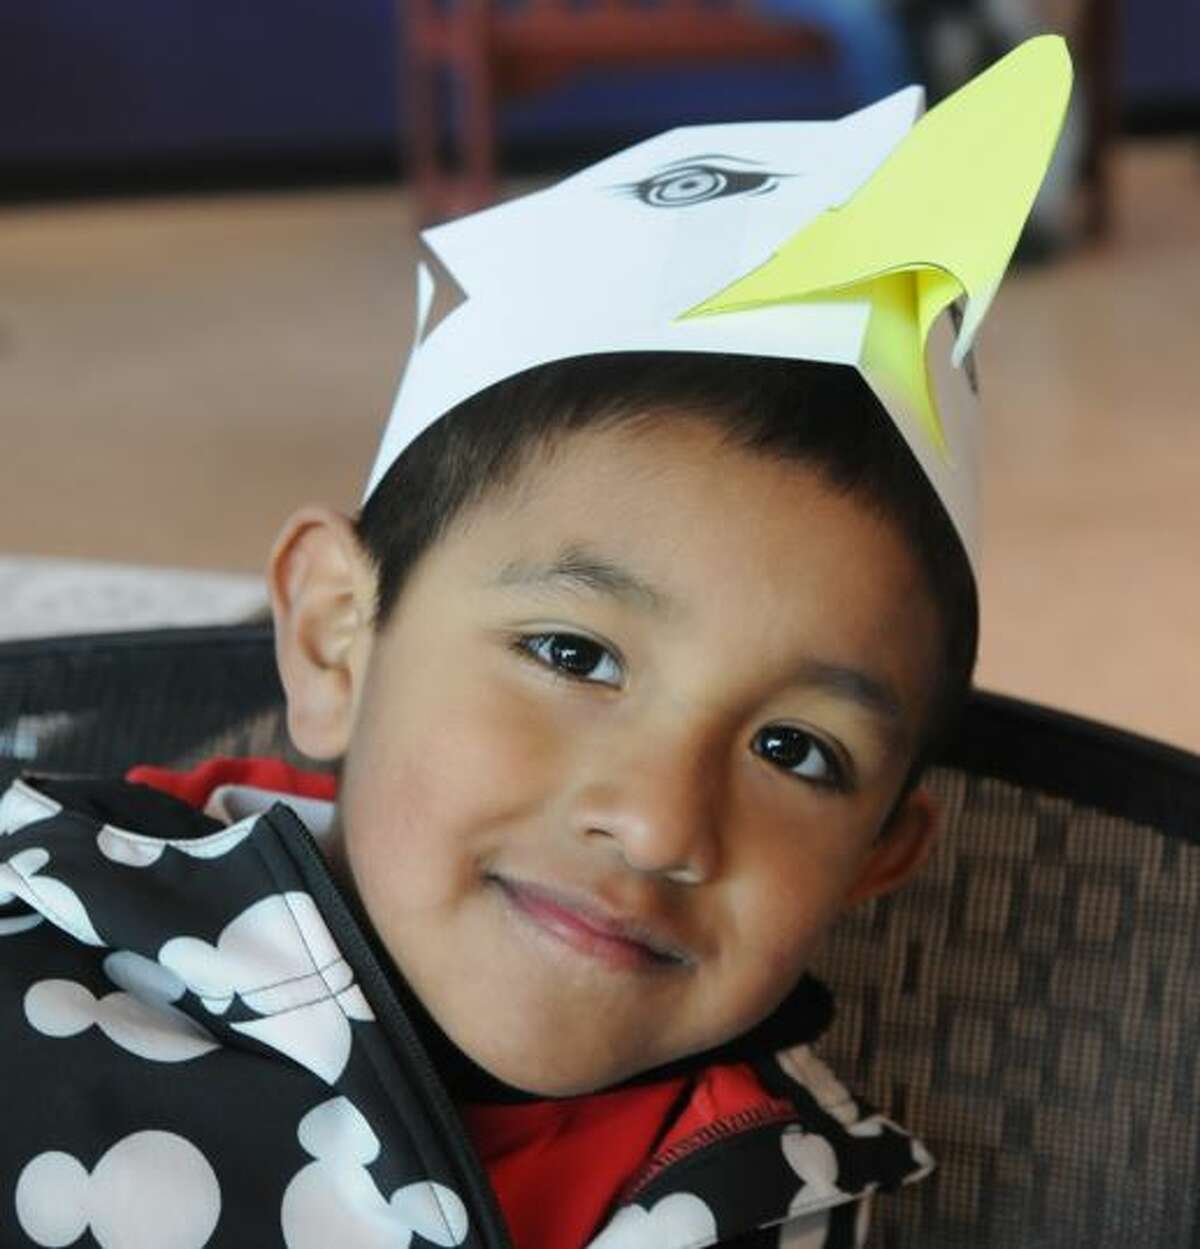 Six-year-old Marco Beltran of Hoffman Estates, Illinois proudly displays the eagle hat he made at the National Great Rivers Museum on Saturday during Alton's annual Eagle Ice Festival.